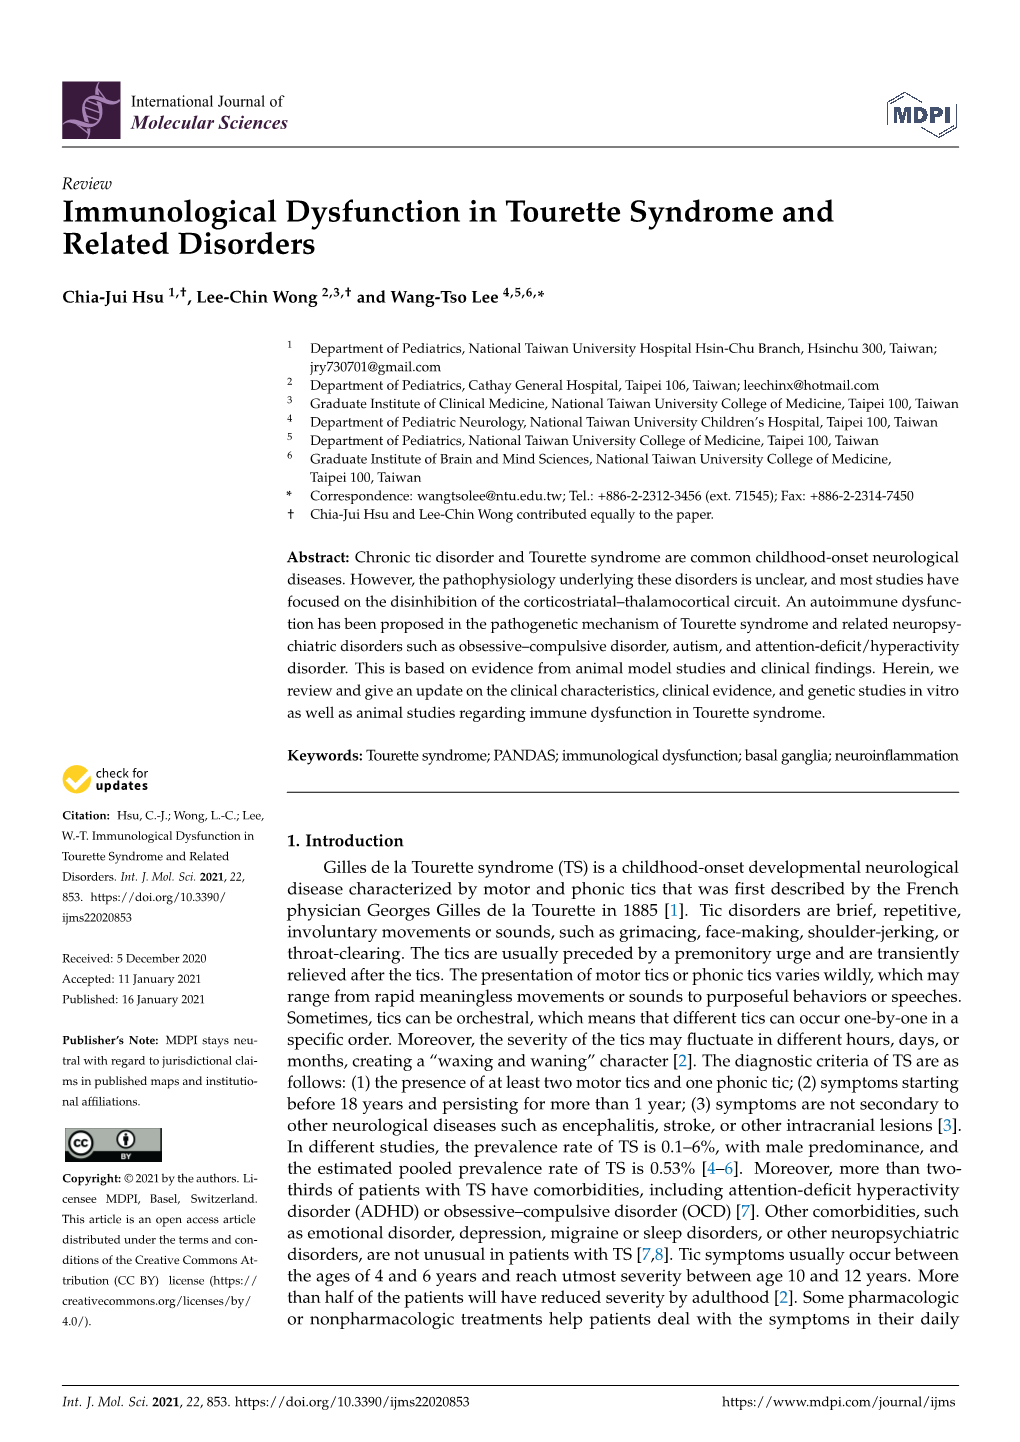 Immunological Dysfunction in Tourette Syndrome and Related Disorders